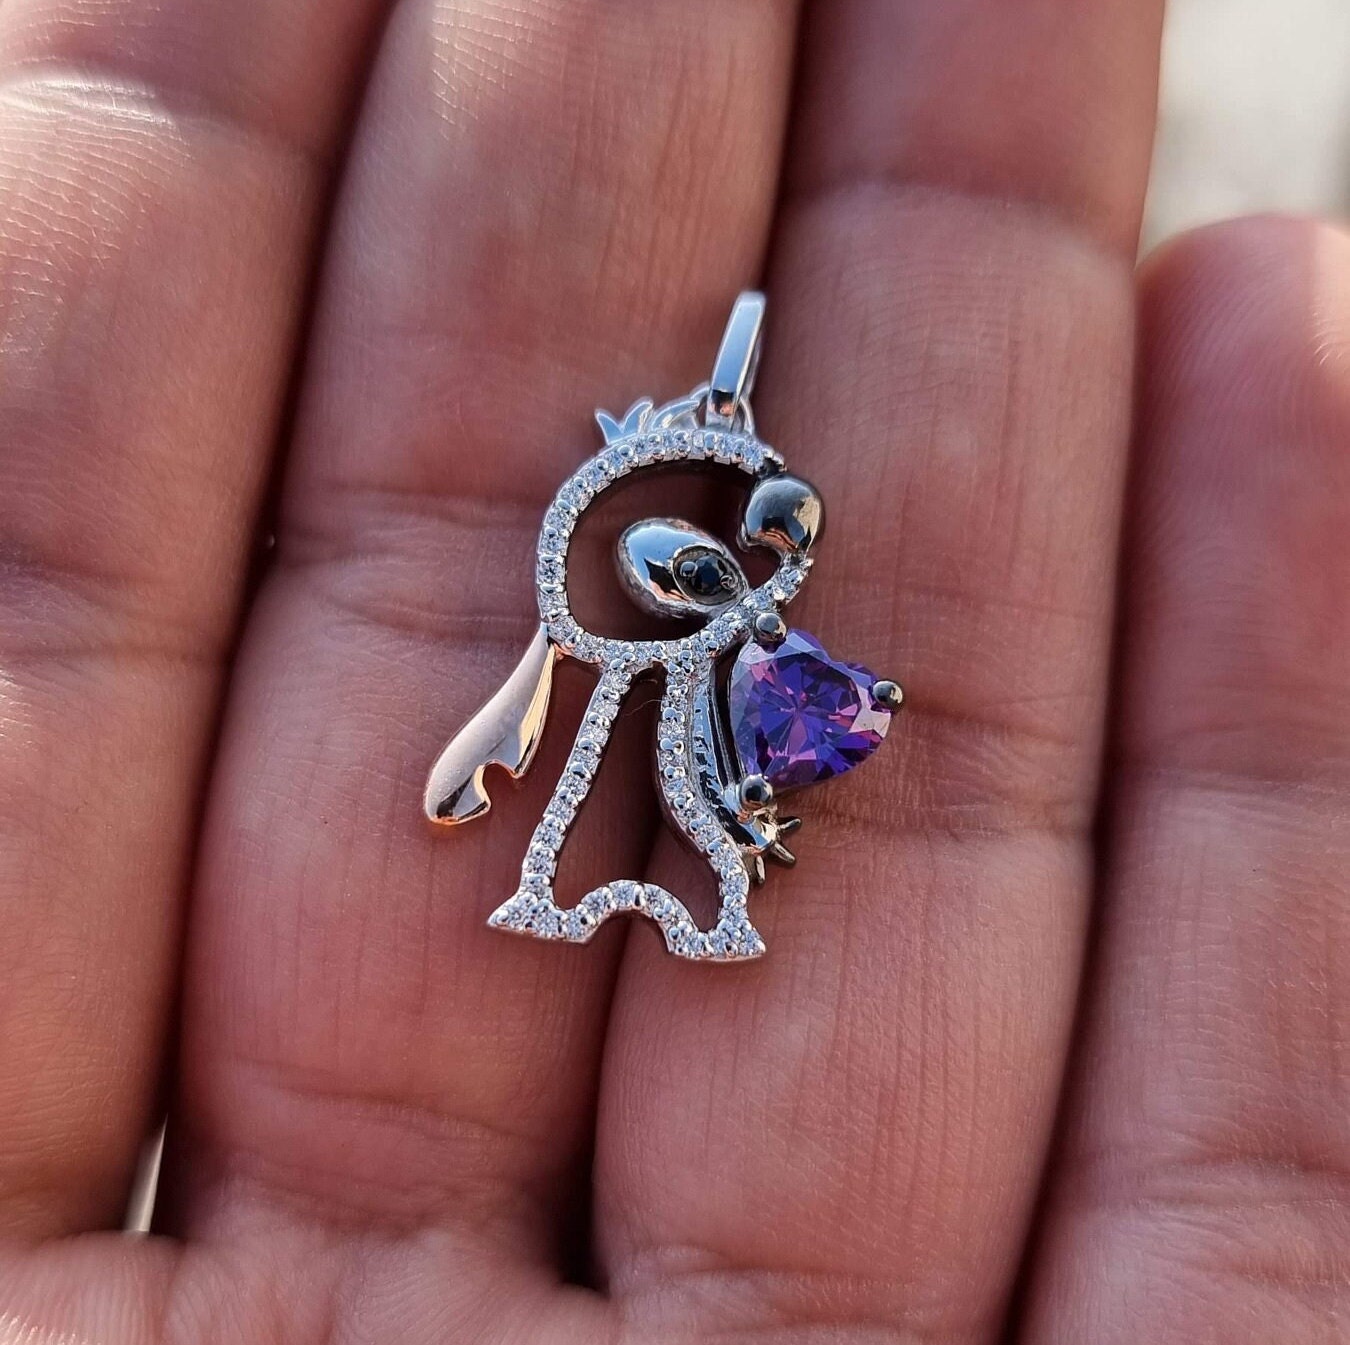 Disney Treasures Lilo & Stitch Pendant, Heart Amethyst CZ Pendant in 925  Sterling Silver, Necklace Chain 16 Inches, Anniversary Gift for Her 